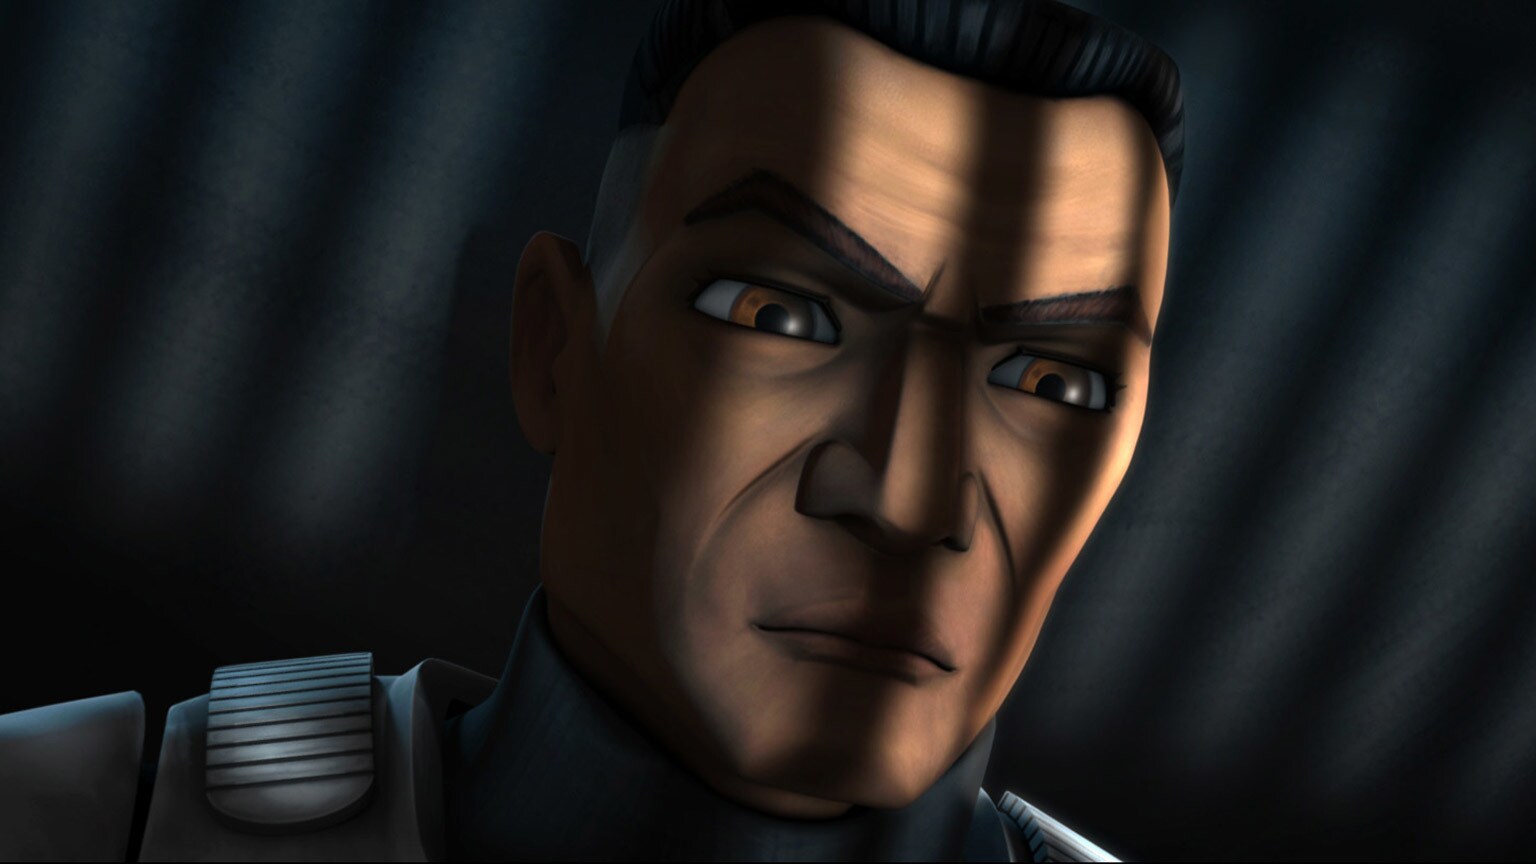 The Clone Wars Rewatch: A Betrayal of Brothers in "The Hidden Enemy"